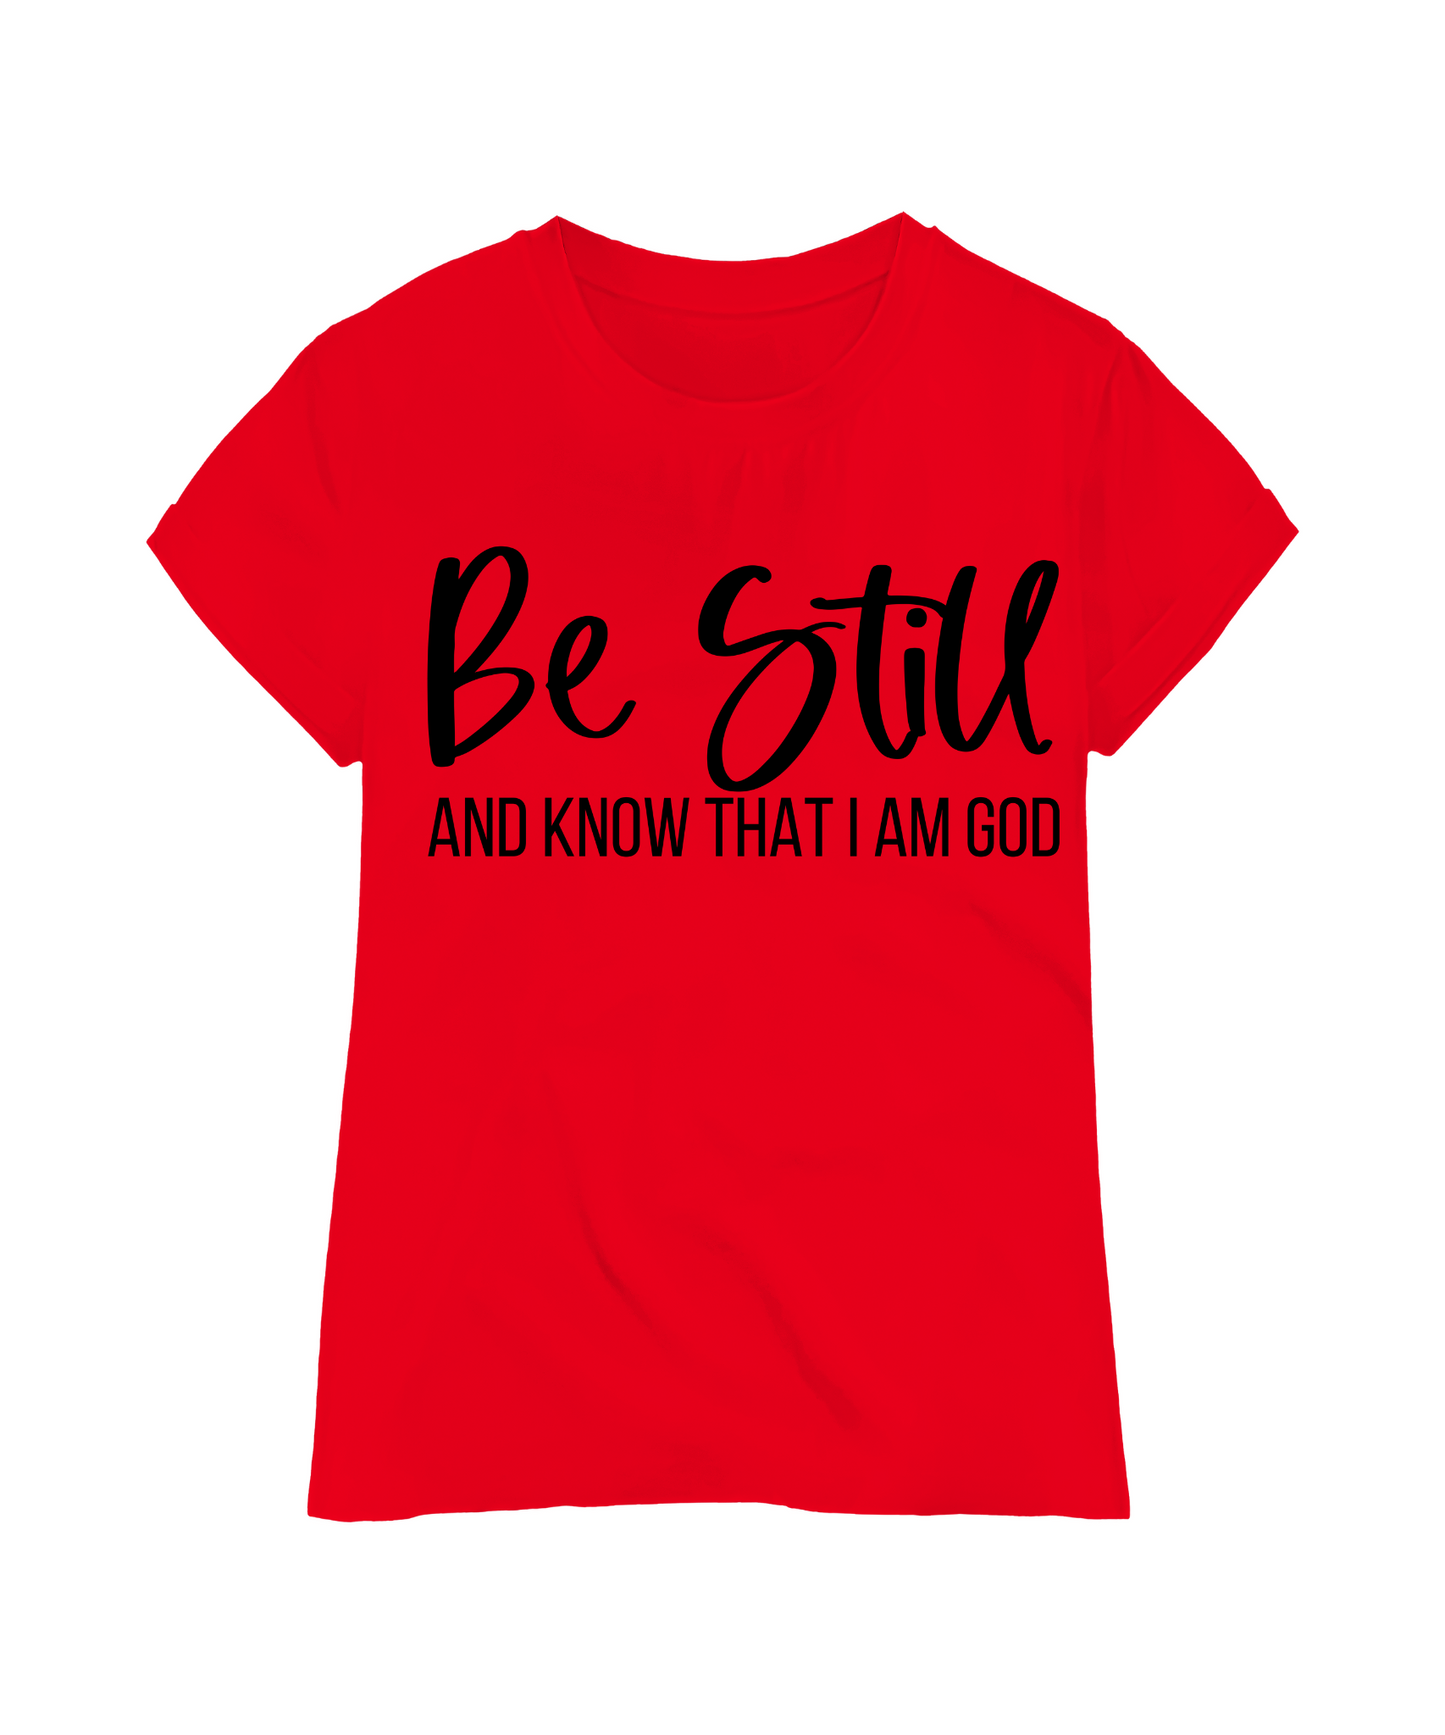 "Be Still and Know" Short Sleeve t-shirt.